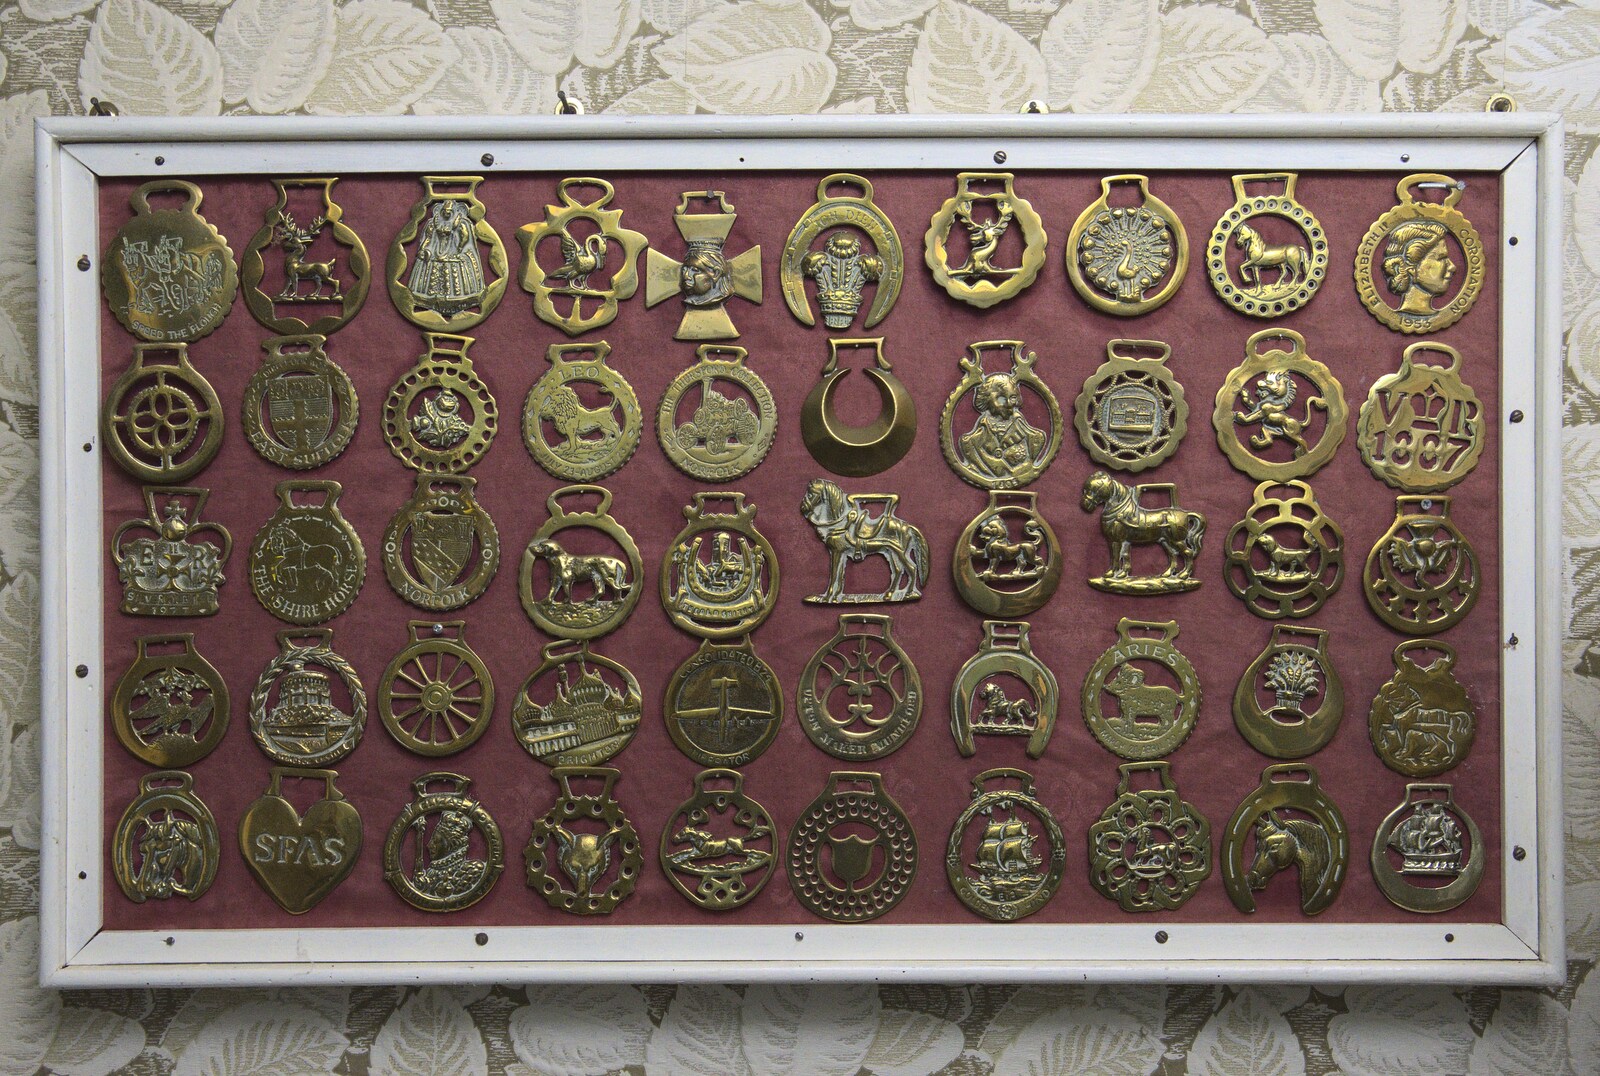 One of several sets of horse brasses from A 1940s Timewarp, Site 4, Bungay Airfield, Flixton, Suffolk - 9th June 2022